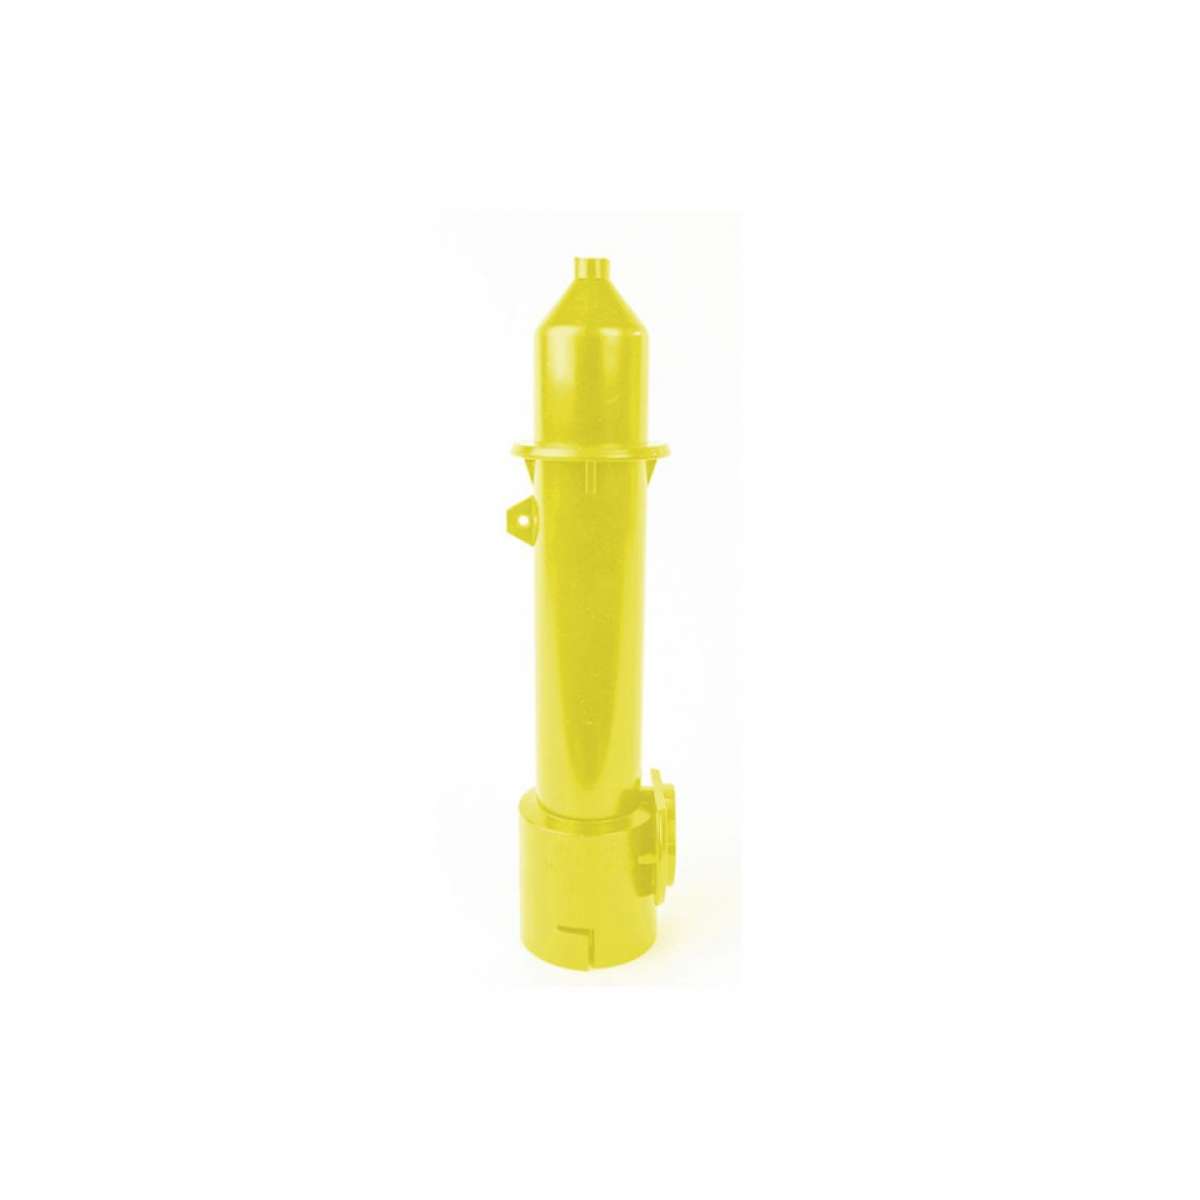 IsoLink 8" Rigid Spout with 1/4" Tip - Yellow